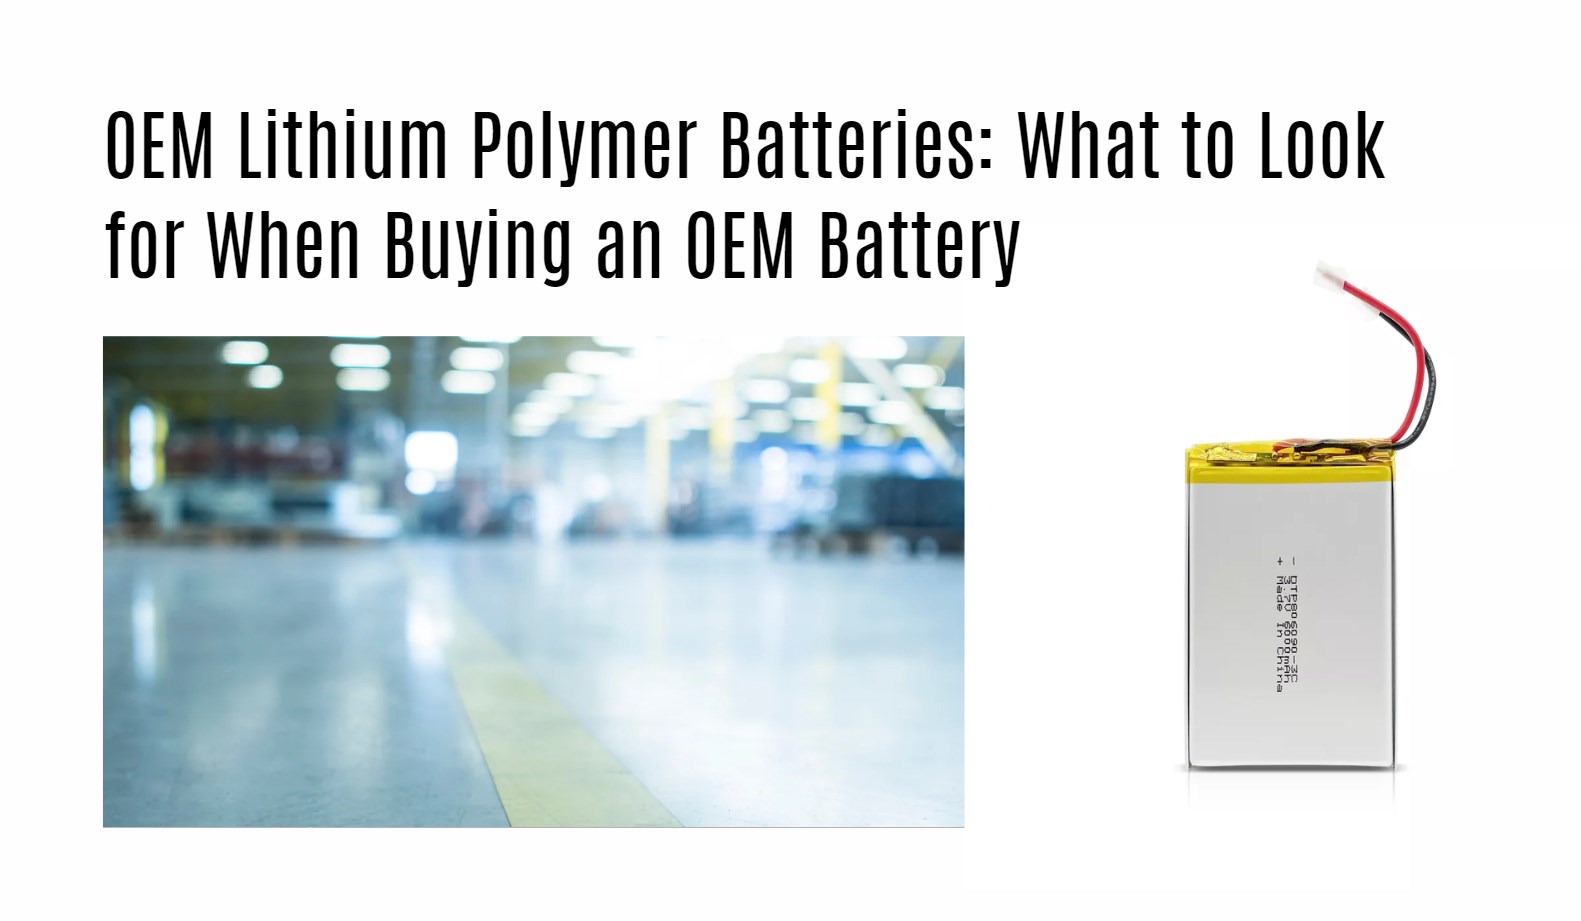 What to Look for When Buying an OEM Battery. what is OEM Lithium Polymer Batteries?